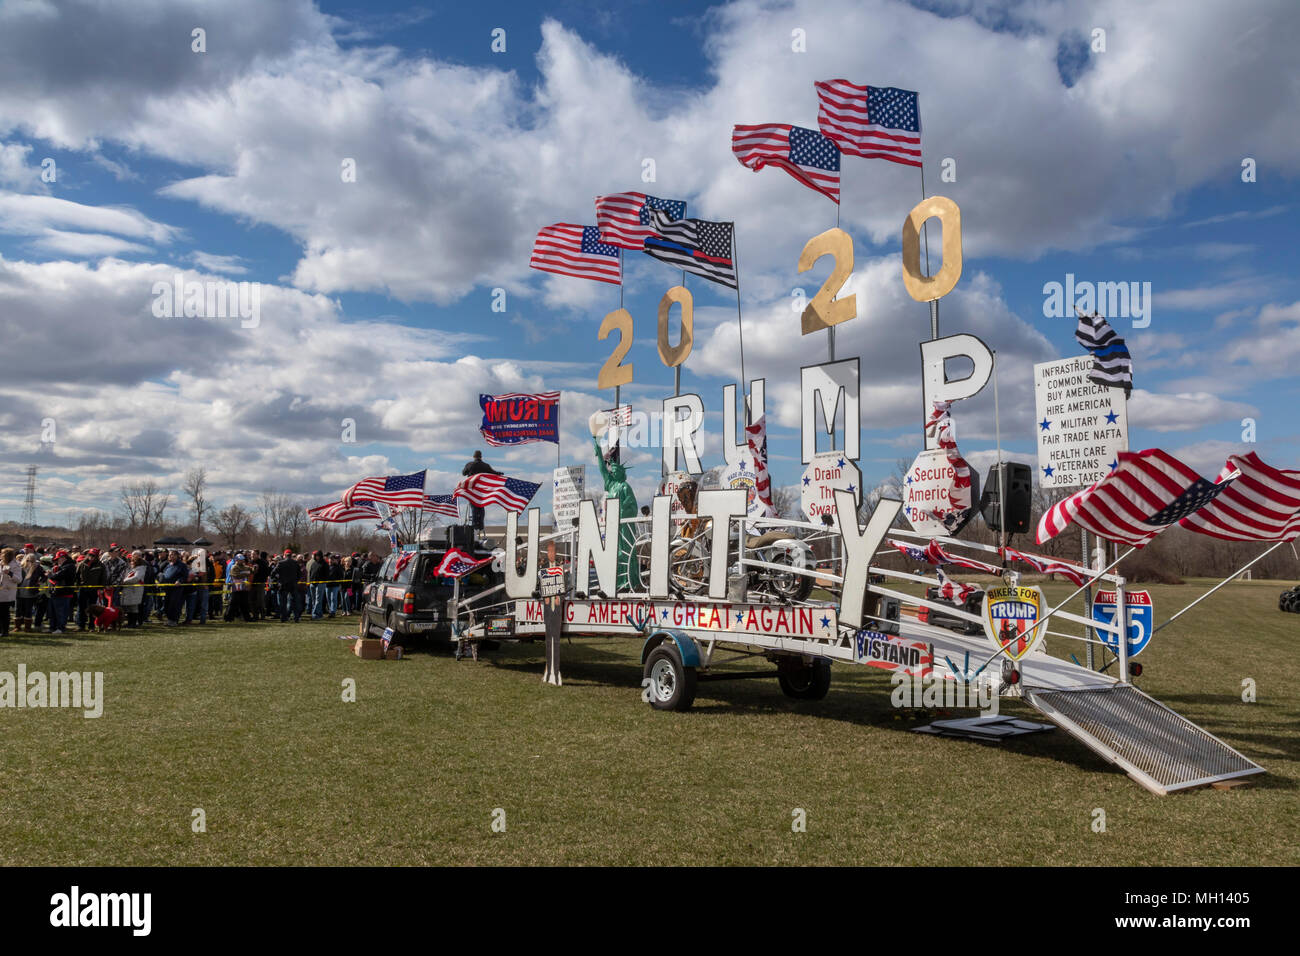 Washington Township, Michigan - Entertainment outside before a President Donald Trump campaign rally in Macomb County, Michigan. Stock Photo